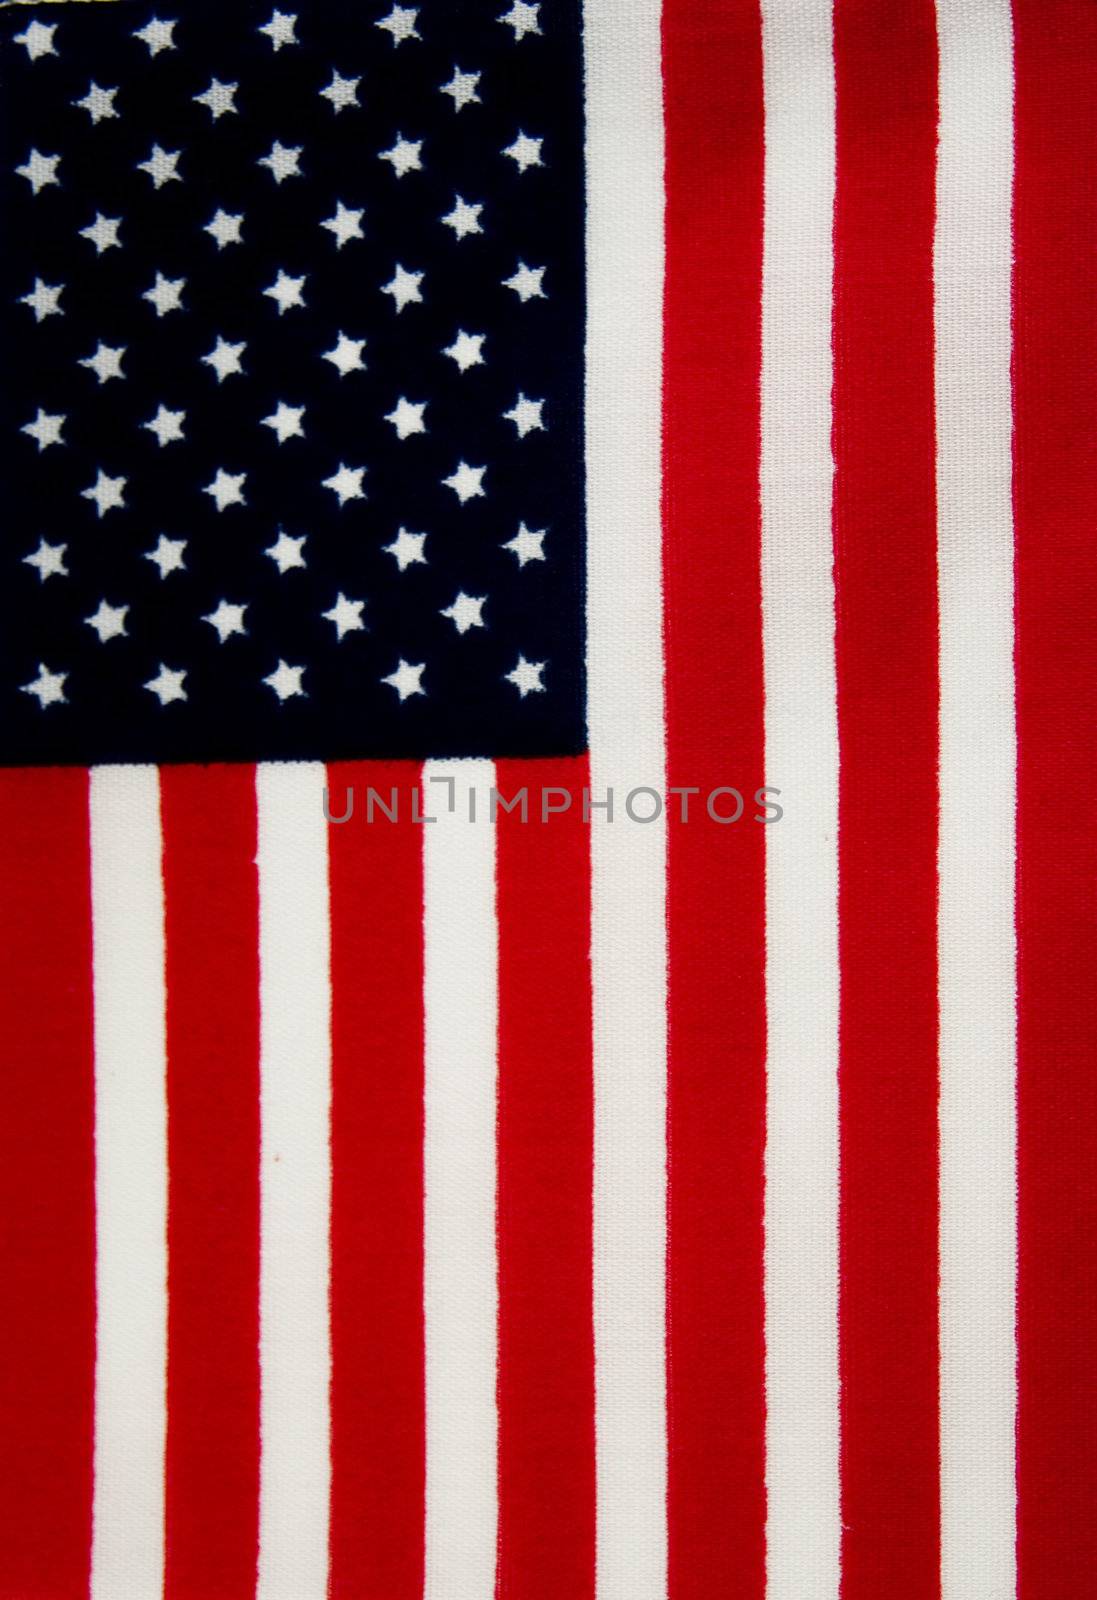 American flag hanging vertical makes a background